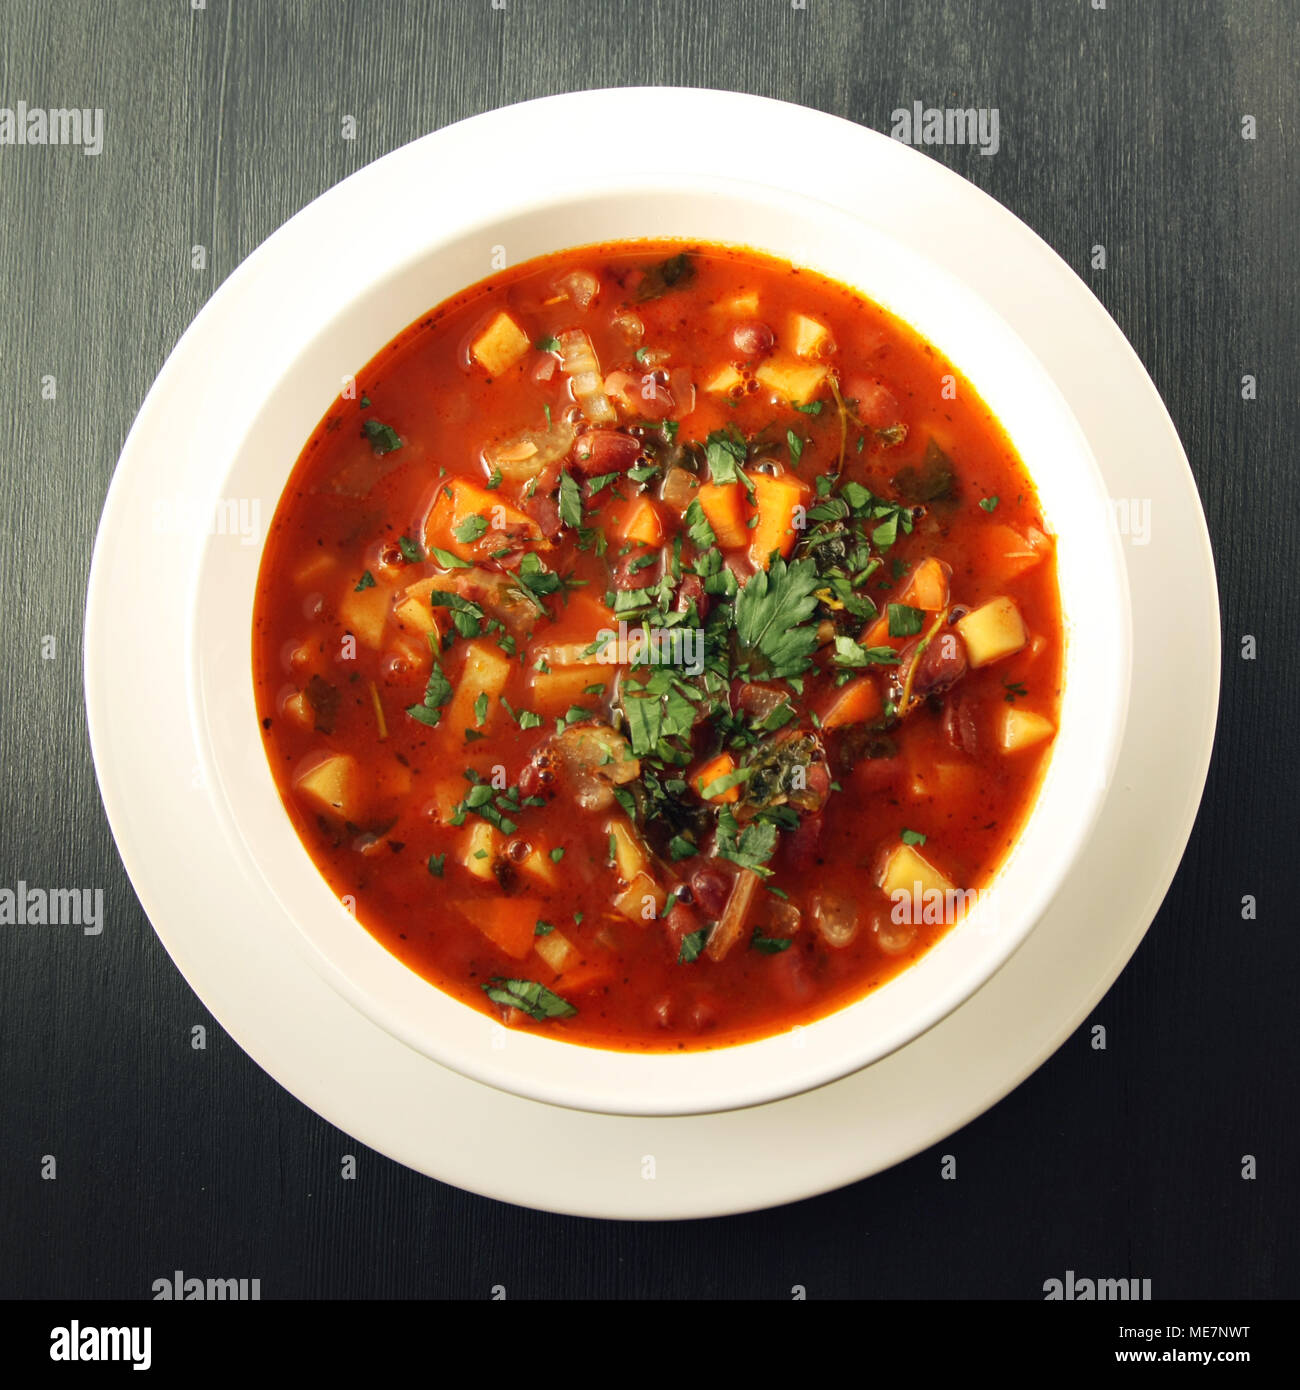 Tomato soup with red beans, potato and carrot. Vegan diet. European cuisine. Vegetarian dish. Main course. Organic meal. Toned photo. Top view. Stock Photo